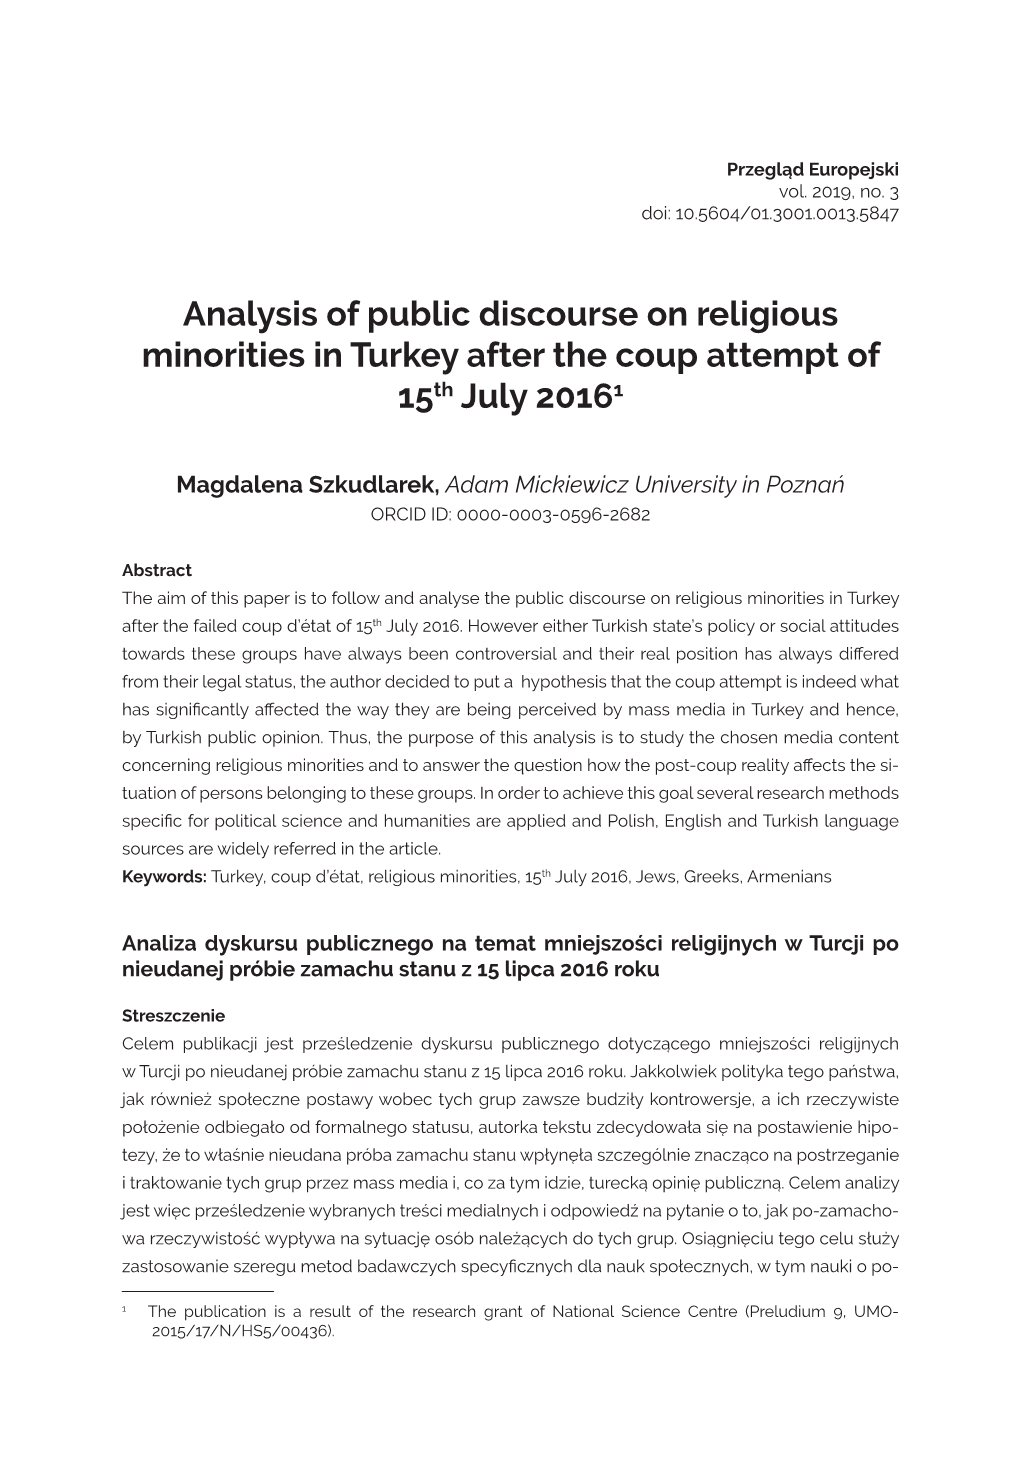 Analysis of Public Discourse on Religious Minorities in Turkey After the Coup Attempt of 15Th July 20161